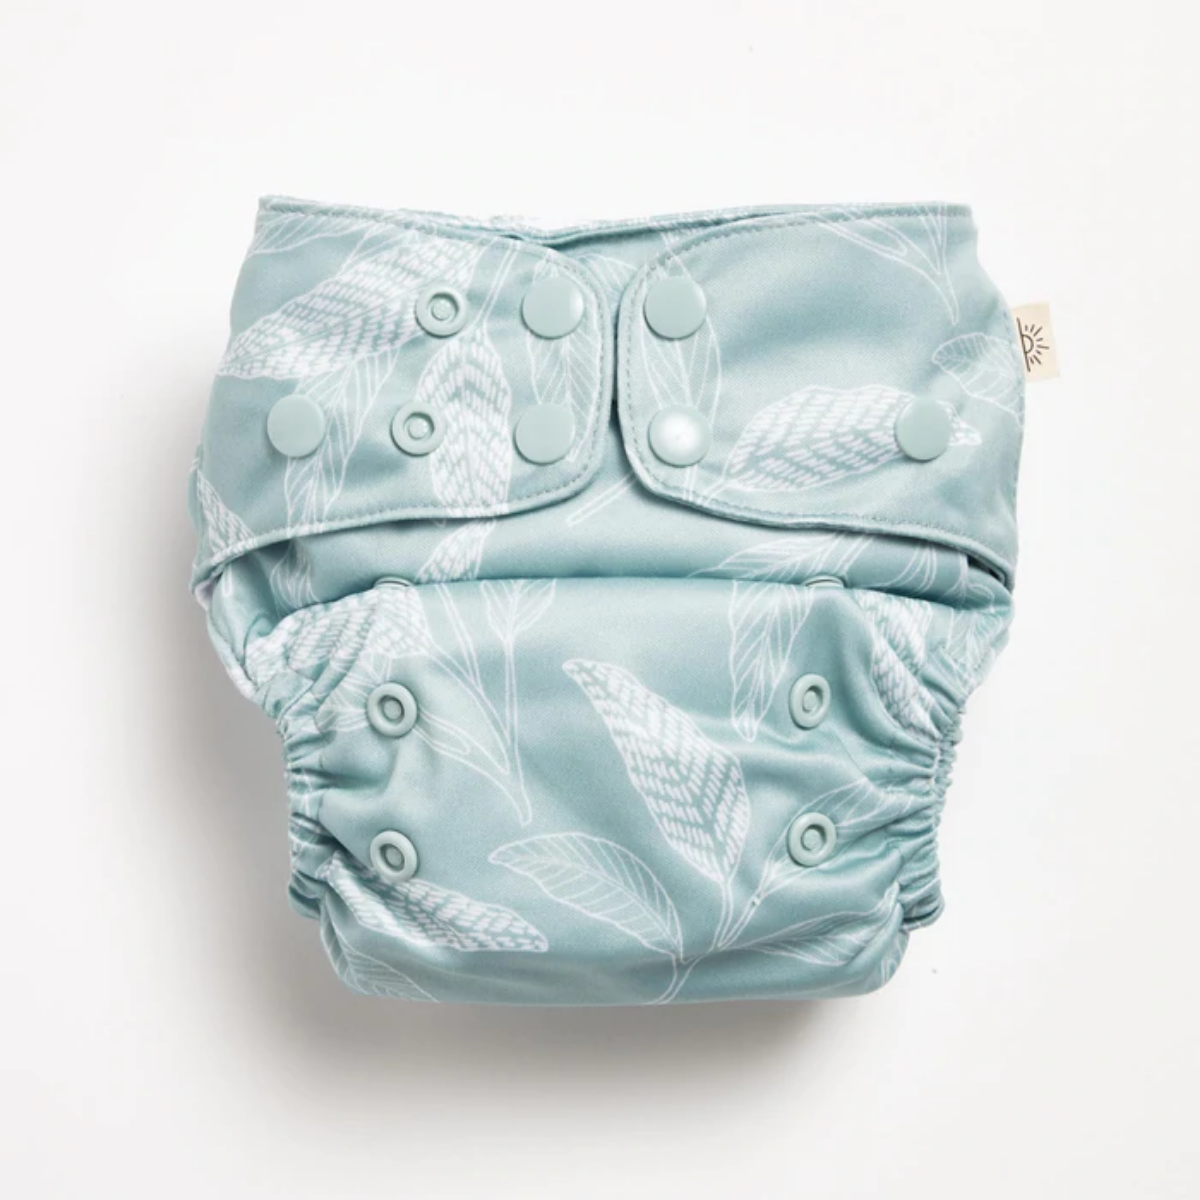 An Ocean Native 2.0 Modern Cloth Nappy with white native prints on it by EcoNaps.